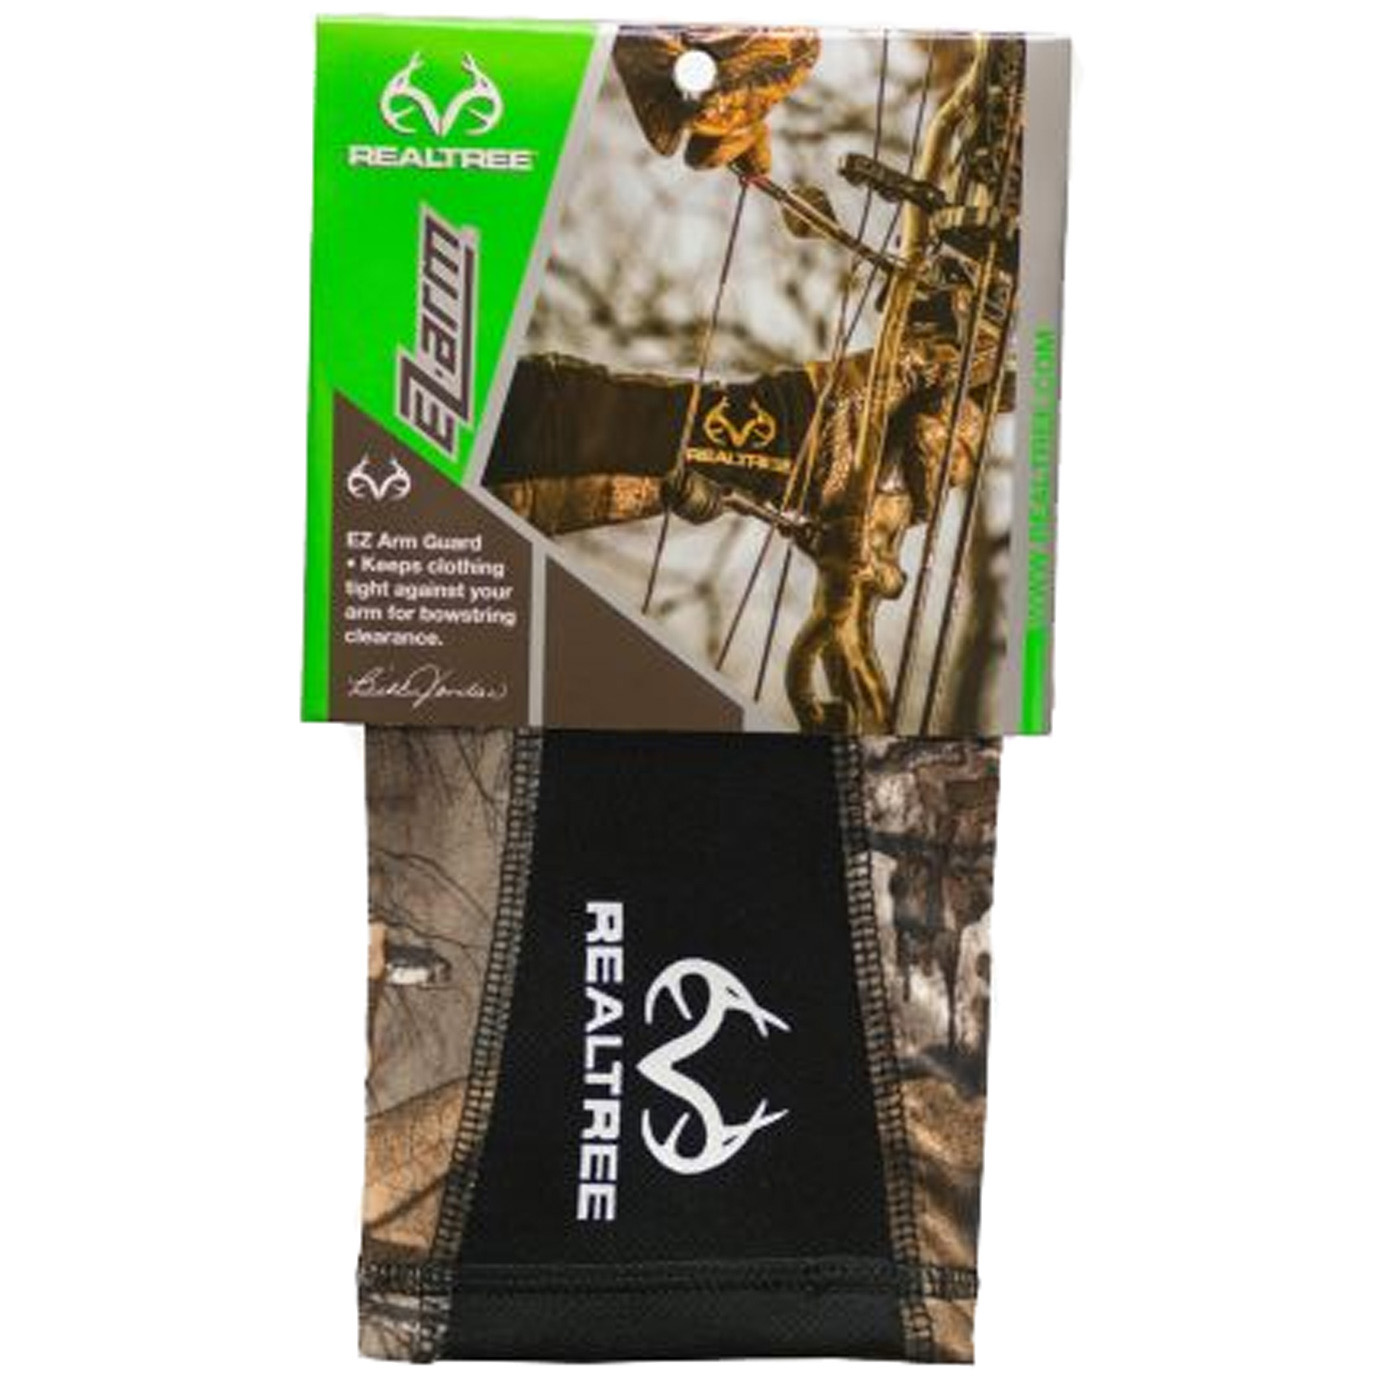 Realtree EZ Arm Guard for Bow Hunting or Shooting 